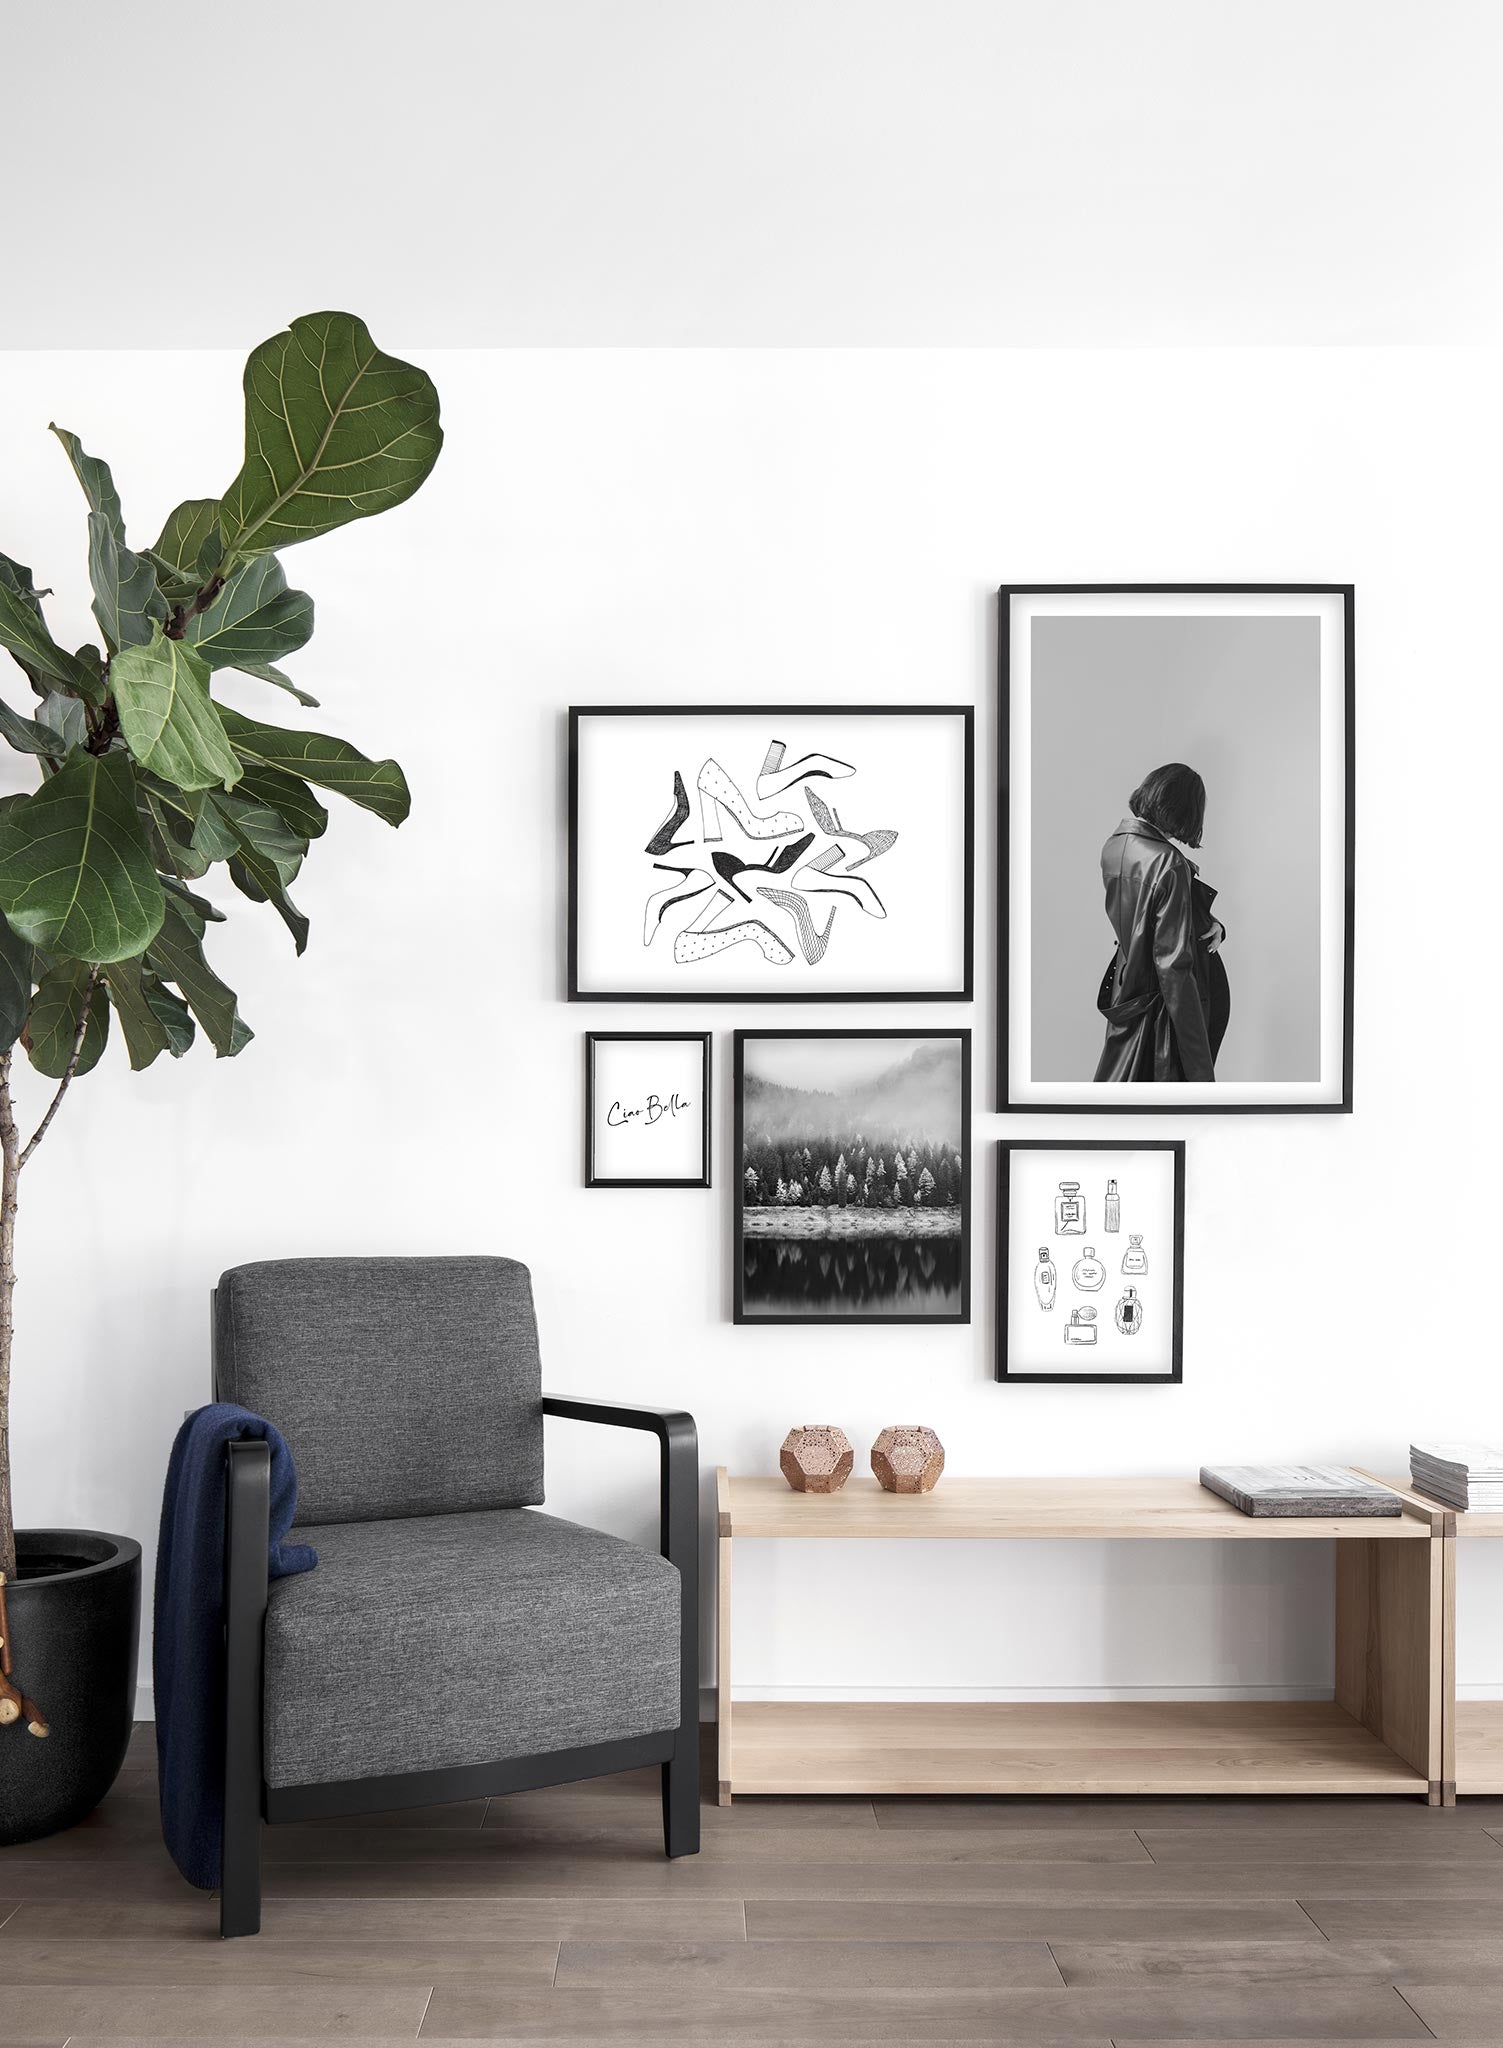 Fashion illustration poster by Opposite Wall with drawing of many high heel shoes - Lifestyle Gallery - Living Room